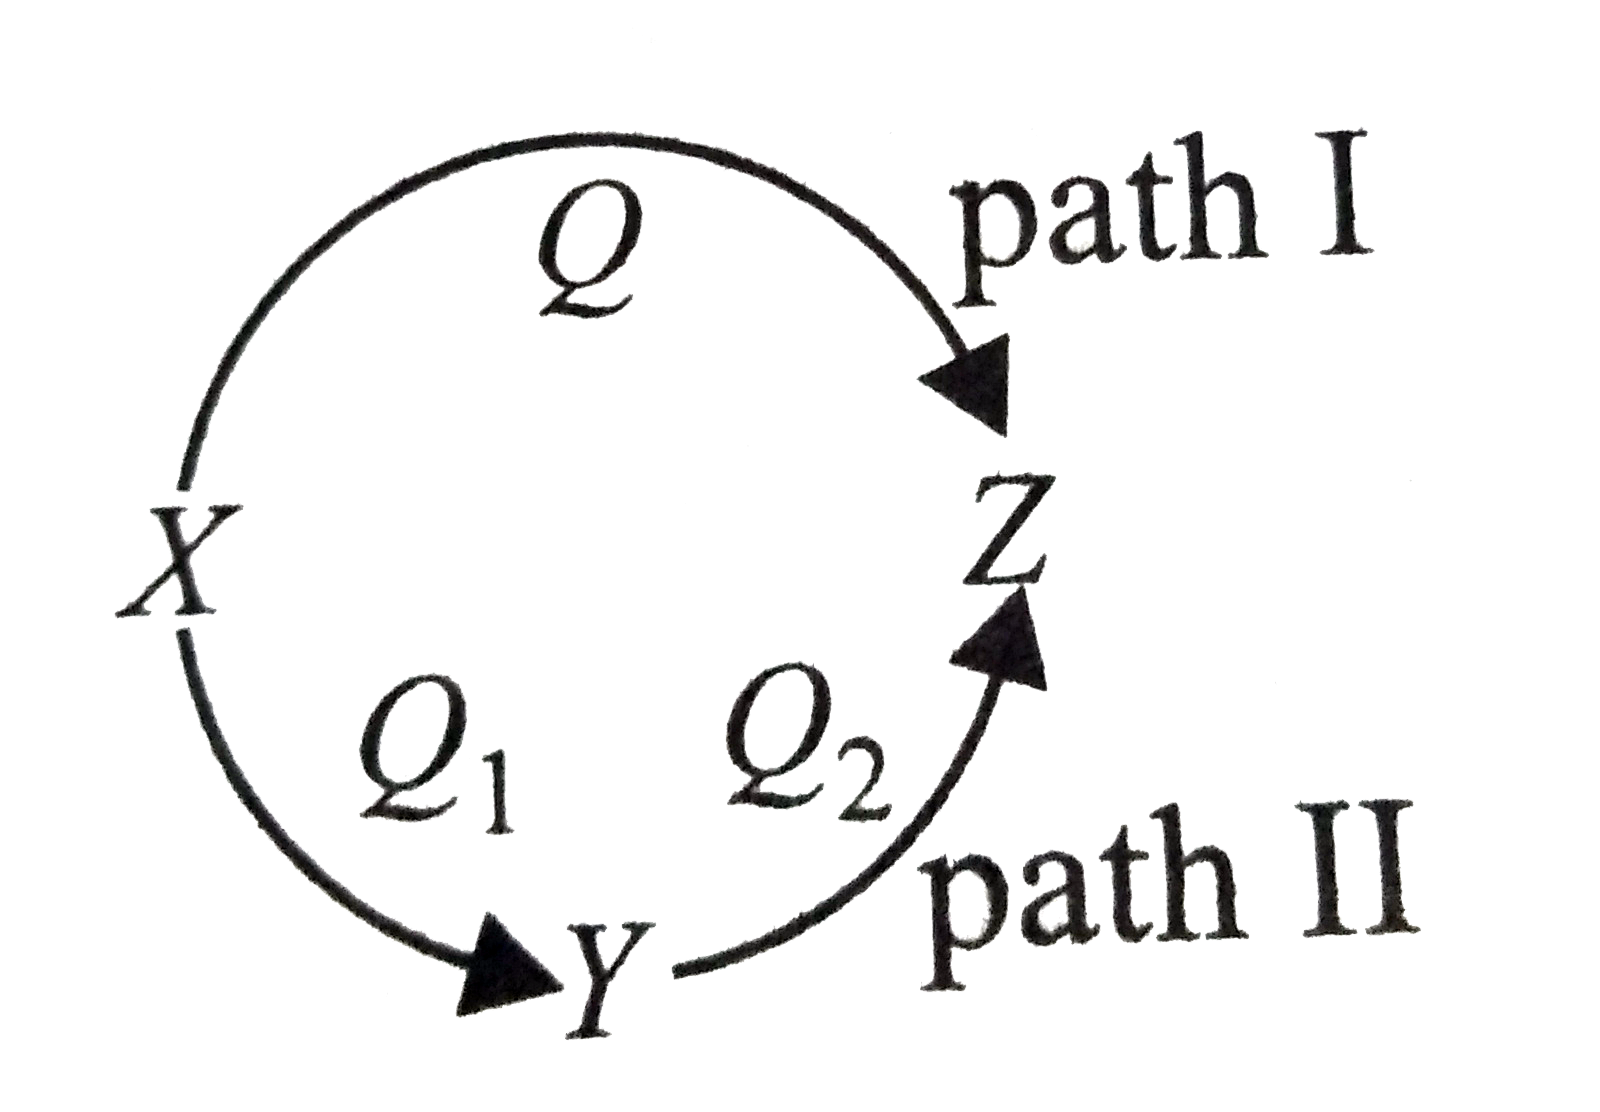 A reaction proceeds through two paths I and II to convert X rarr Z.      What is the correct relationship between Q. Q(1) and Q(2) ?